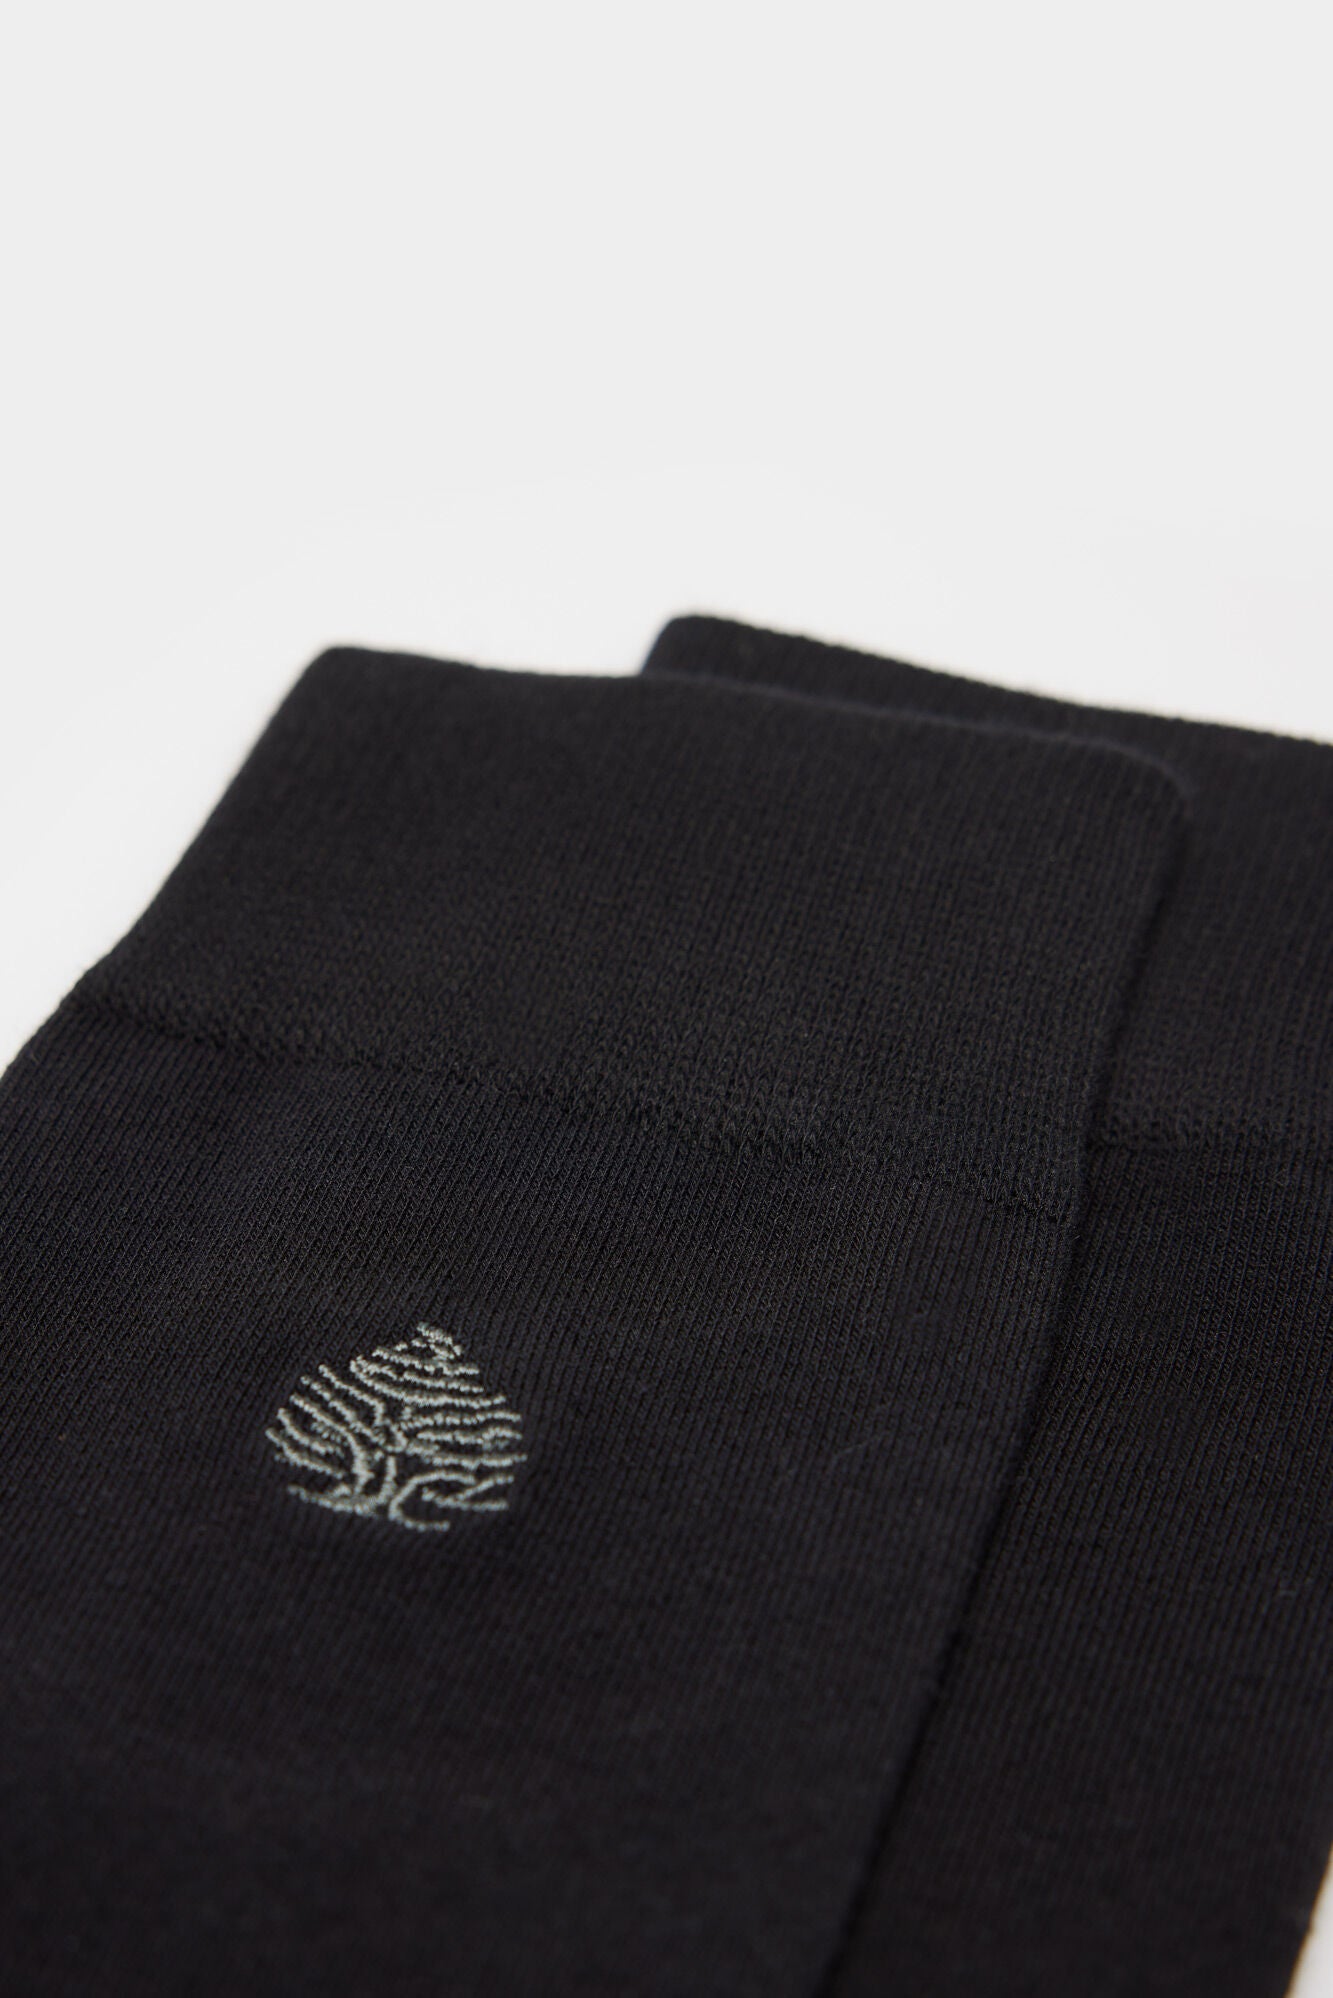 Essential long embroidered logo socks